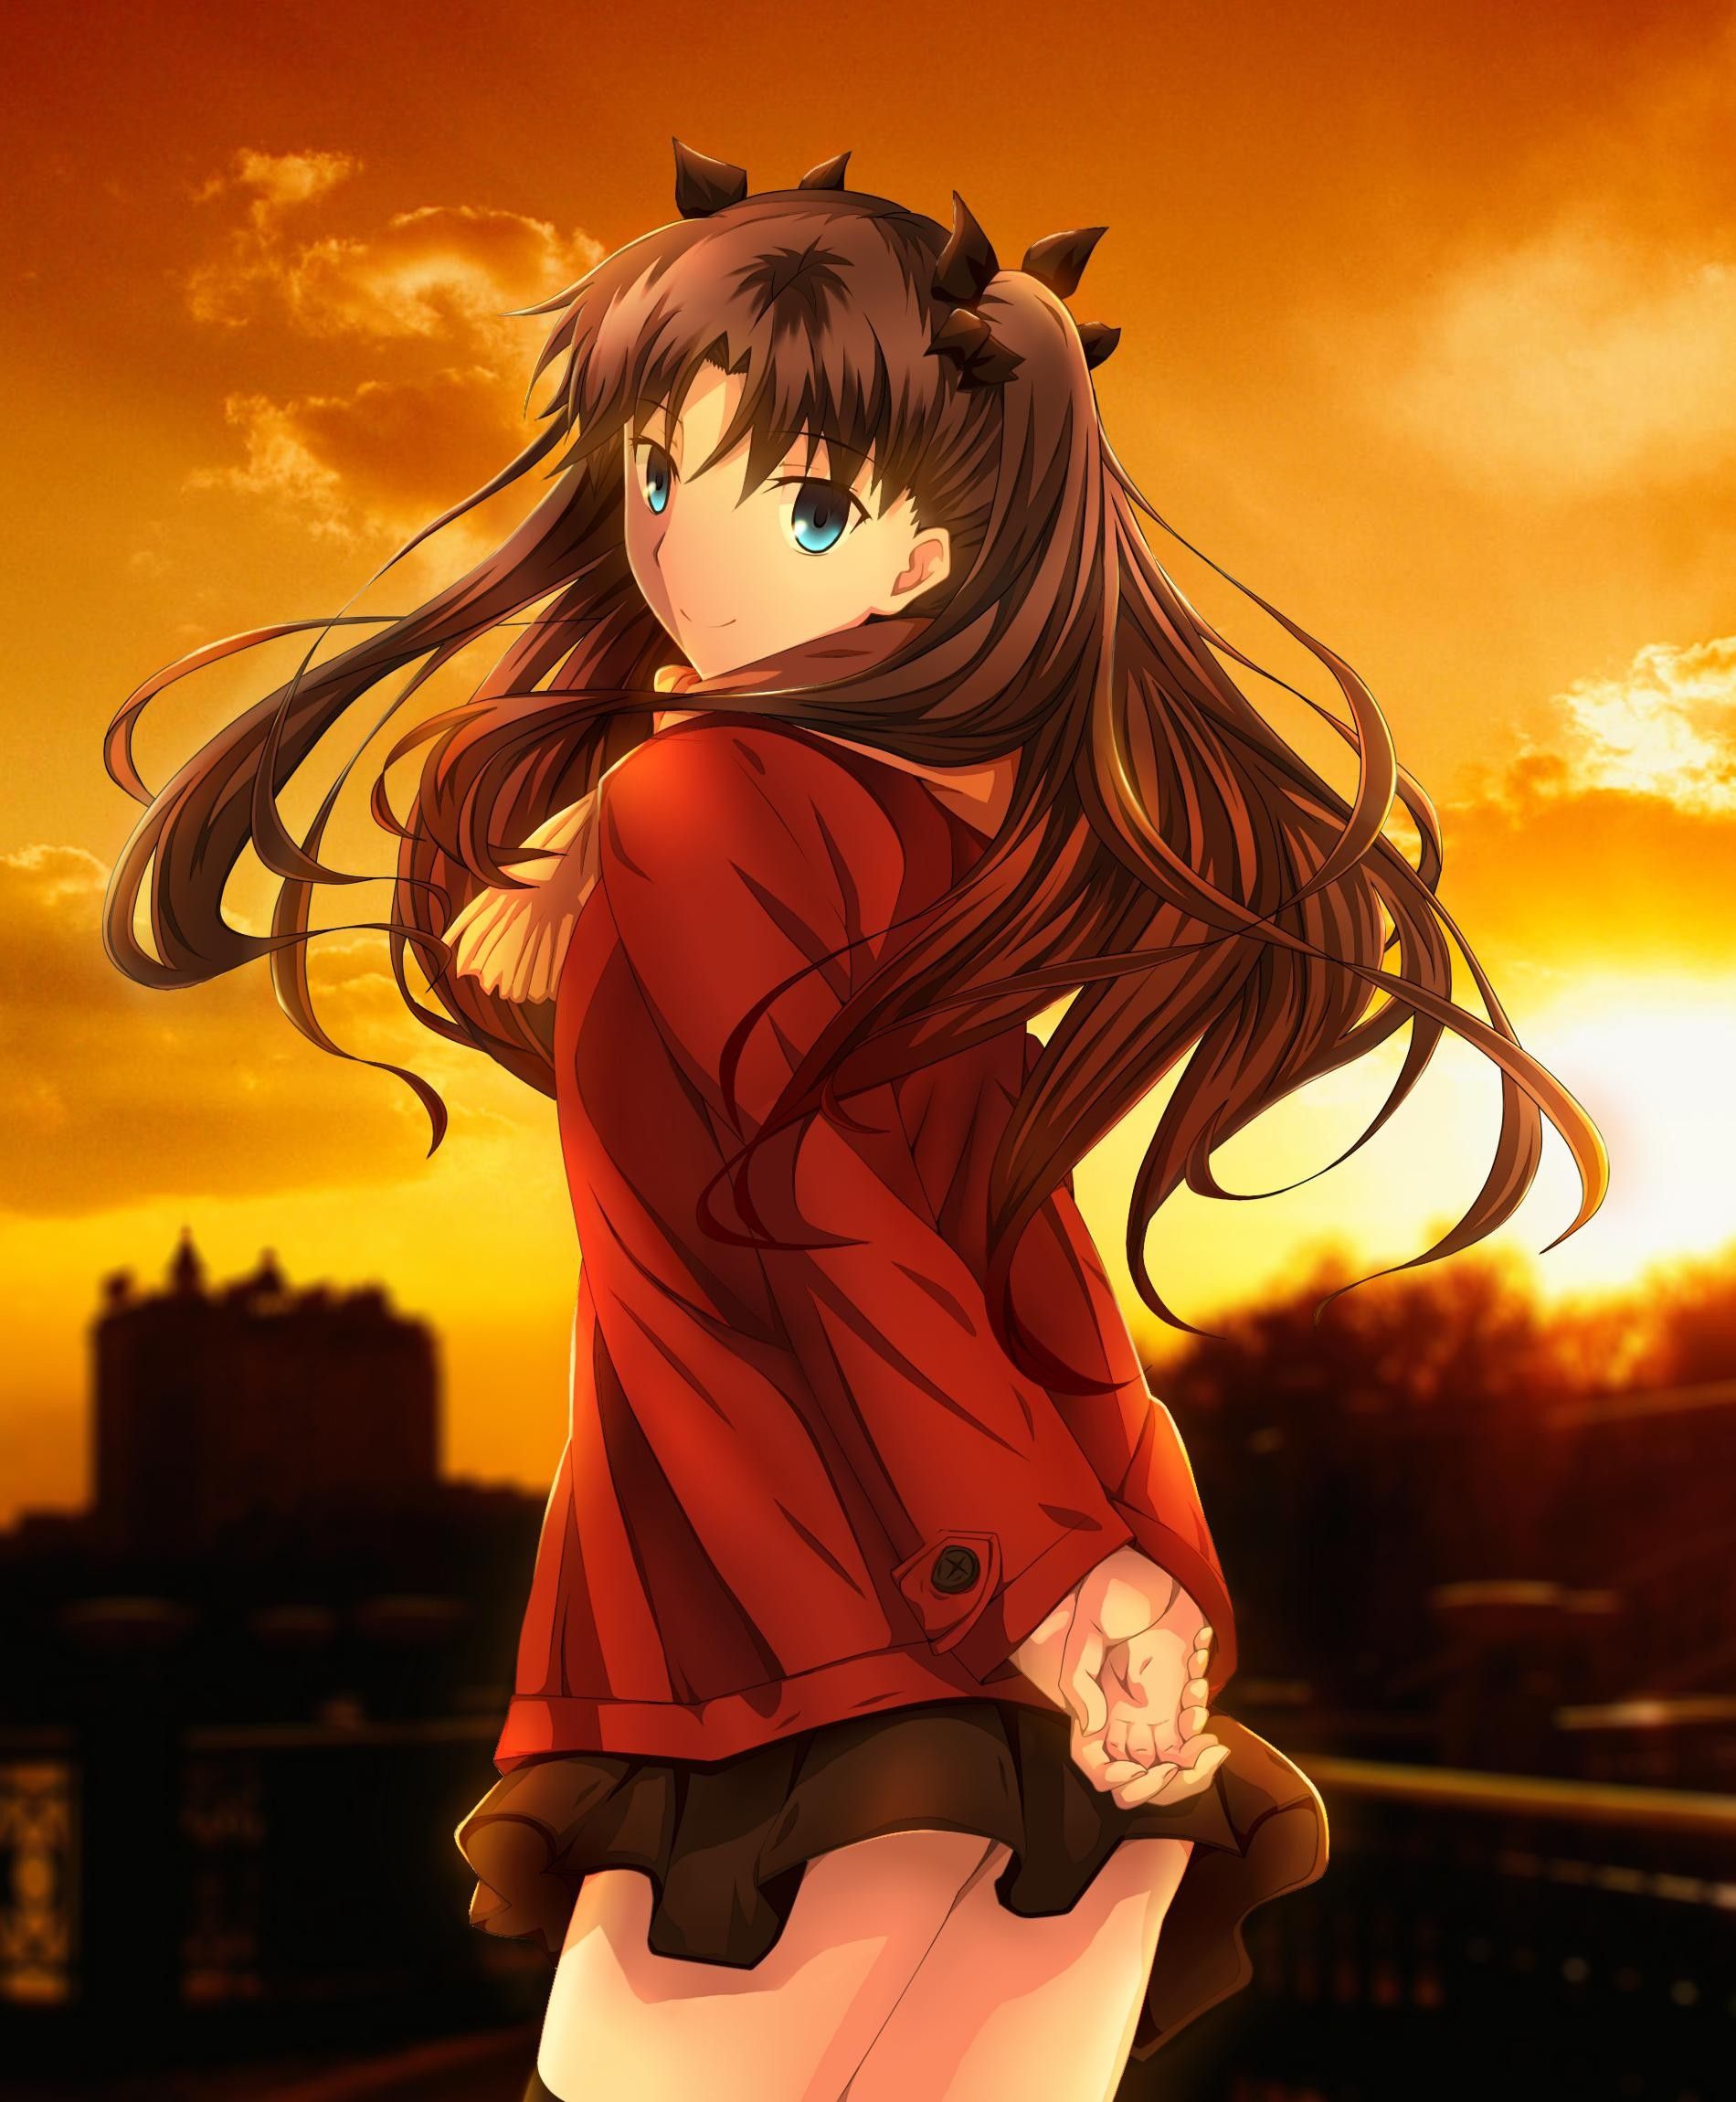 Wallpaper, illustration, anime, Fate Series, Tohsaka Rin, Fate Stay Night Unlimited Blade Works 1900x2300